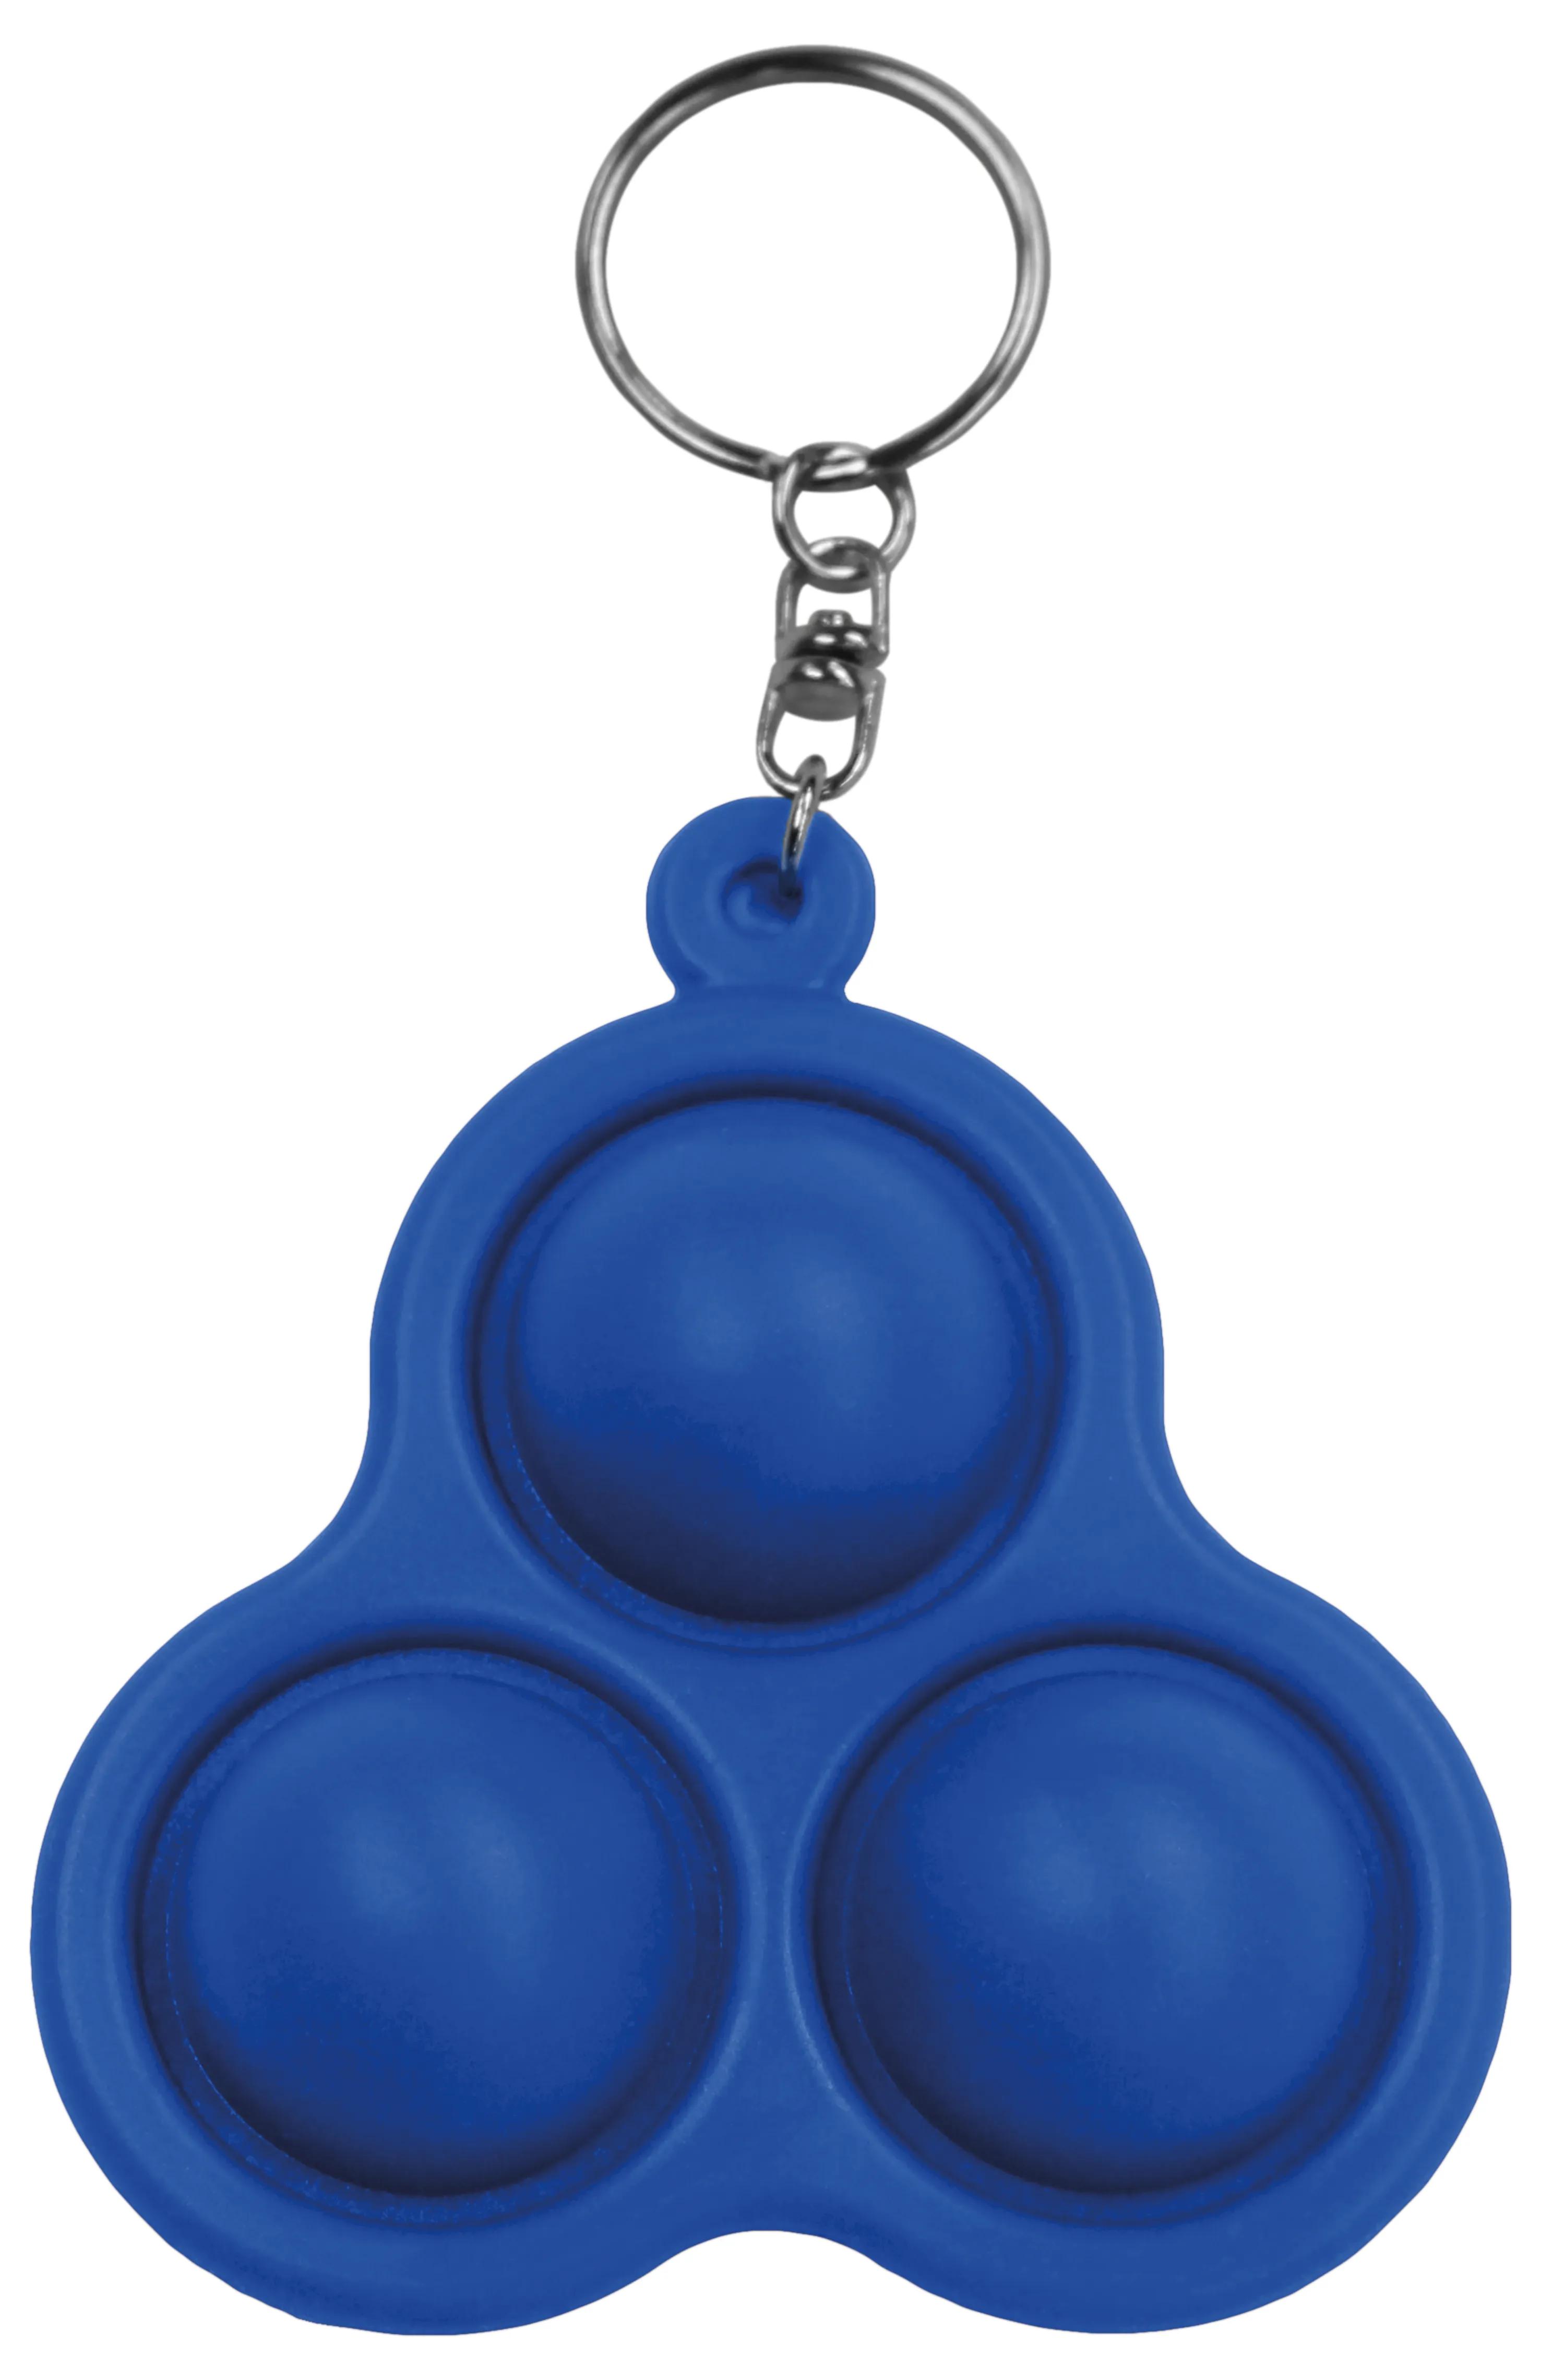 Pop 3 Bubbles Keychain 19 of 32